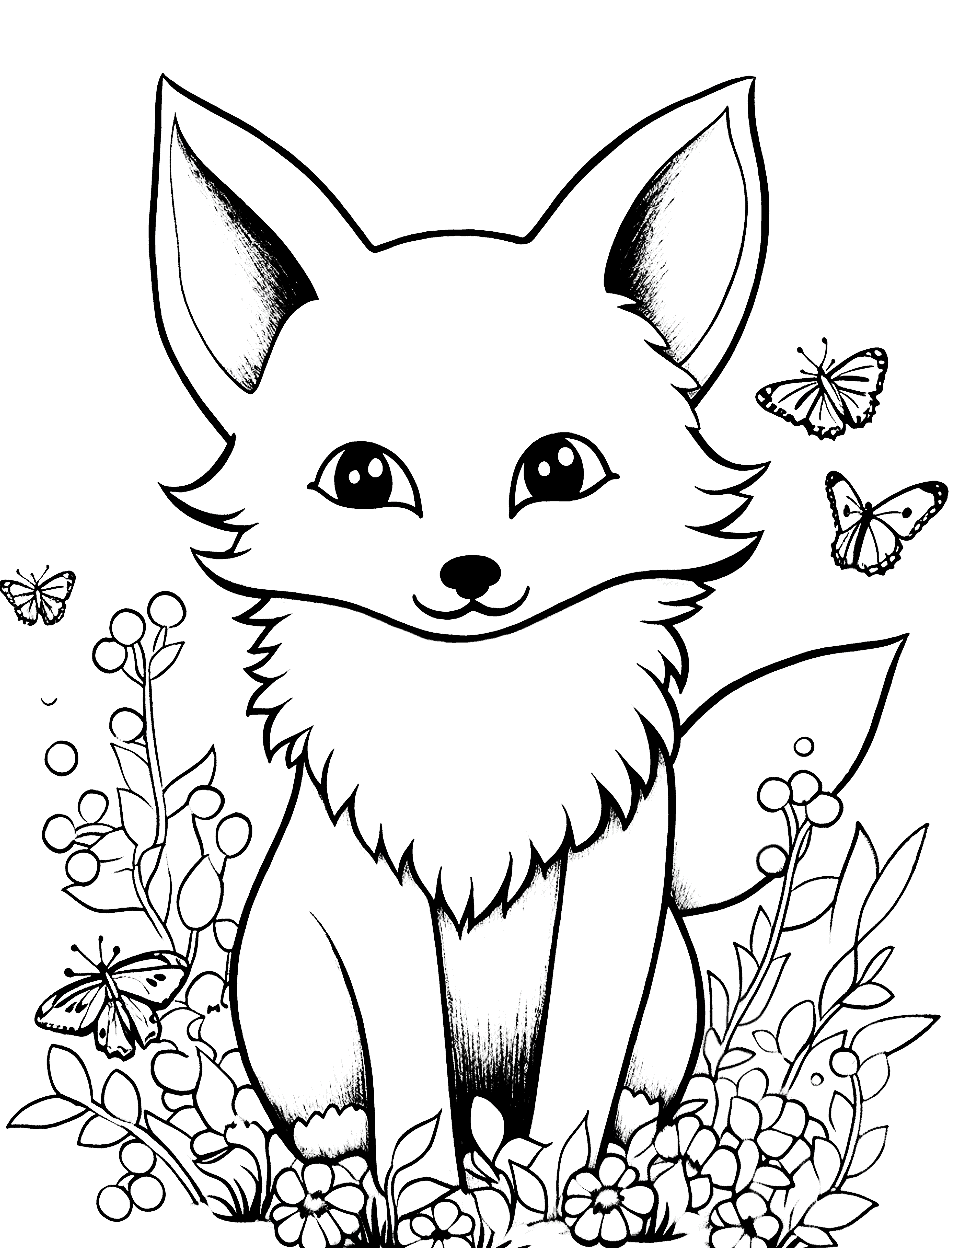 Fox's Butterfly Friends Fox Coloring Page - Surrounded by colorful butterflies, a fox marvels at nature’s beauty.